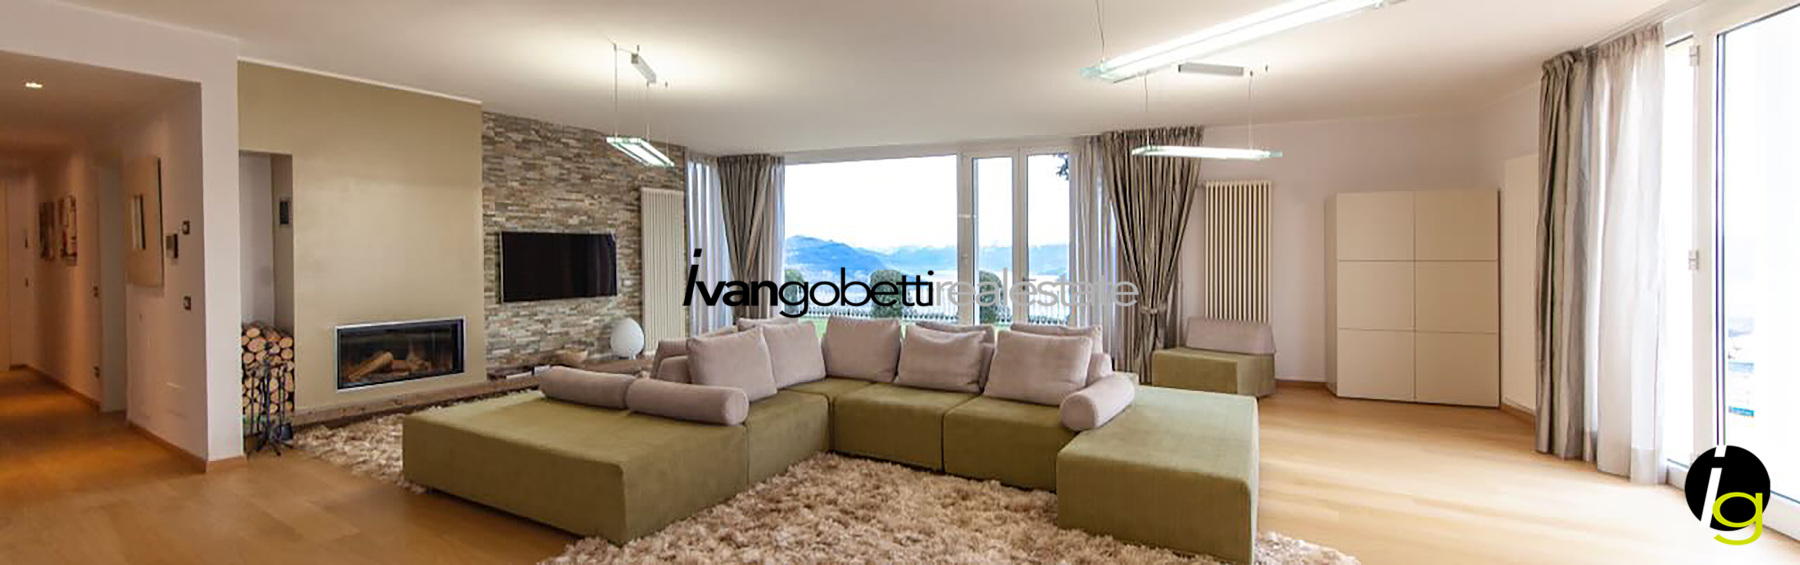 Luxurious modern villa with magnificent lake view and swimming pool on the hills of Stresa Lake Maggiore<br/><span>Product Code: 160123